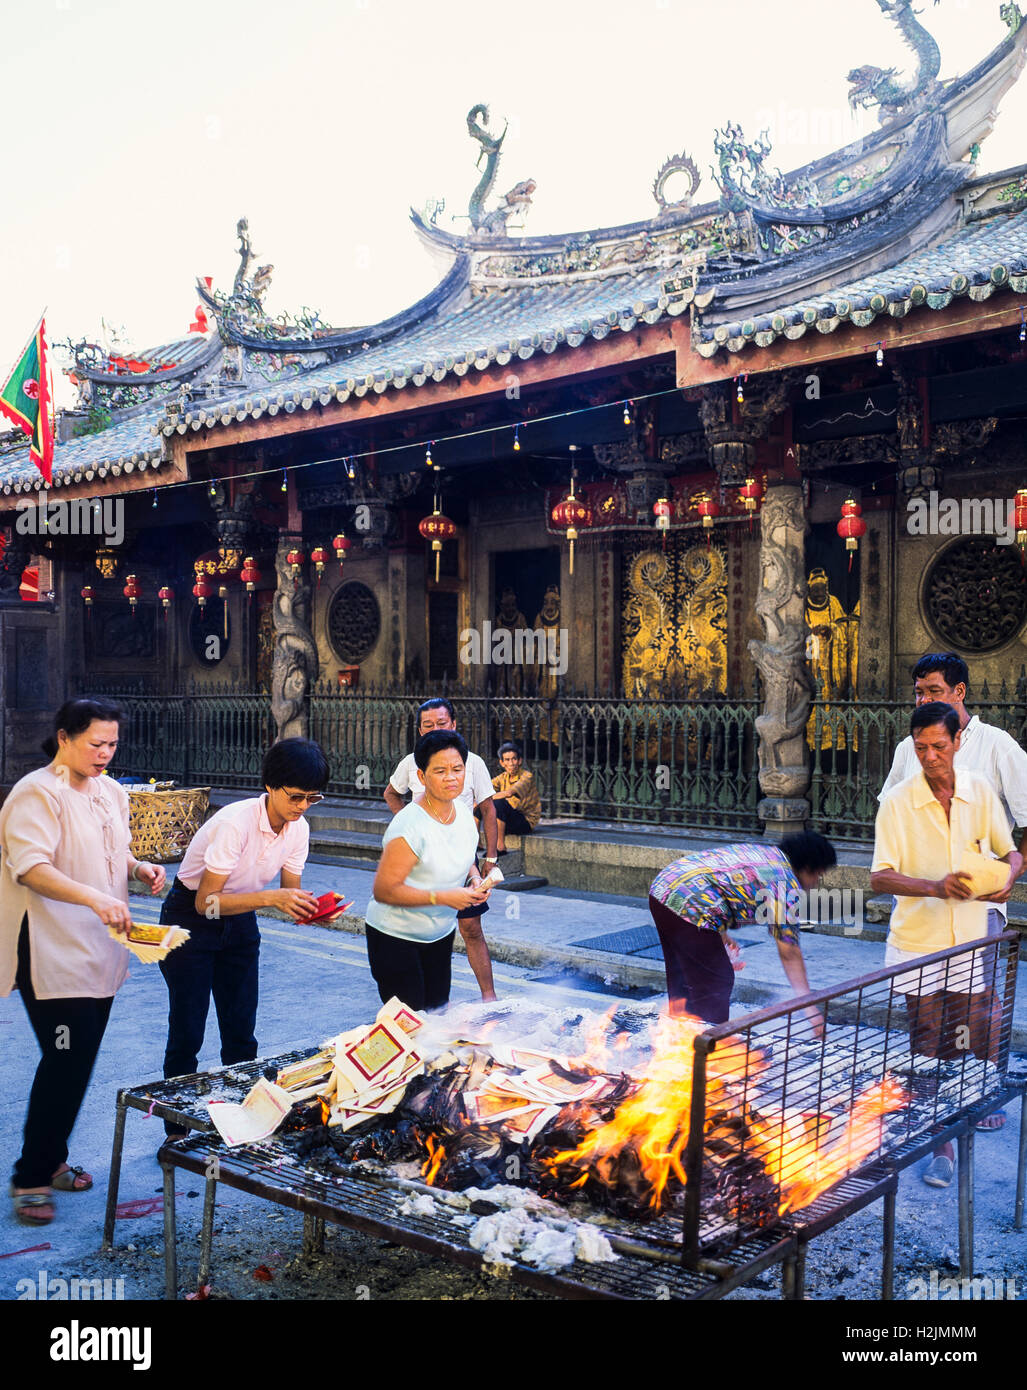 People burning ghost money in front of Thian Hock Keng Chinese temple, Singapore Stock Photo